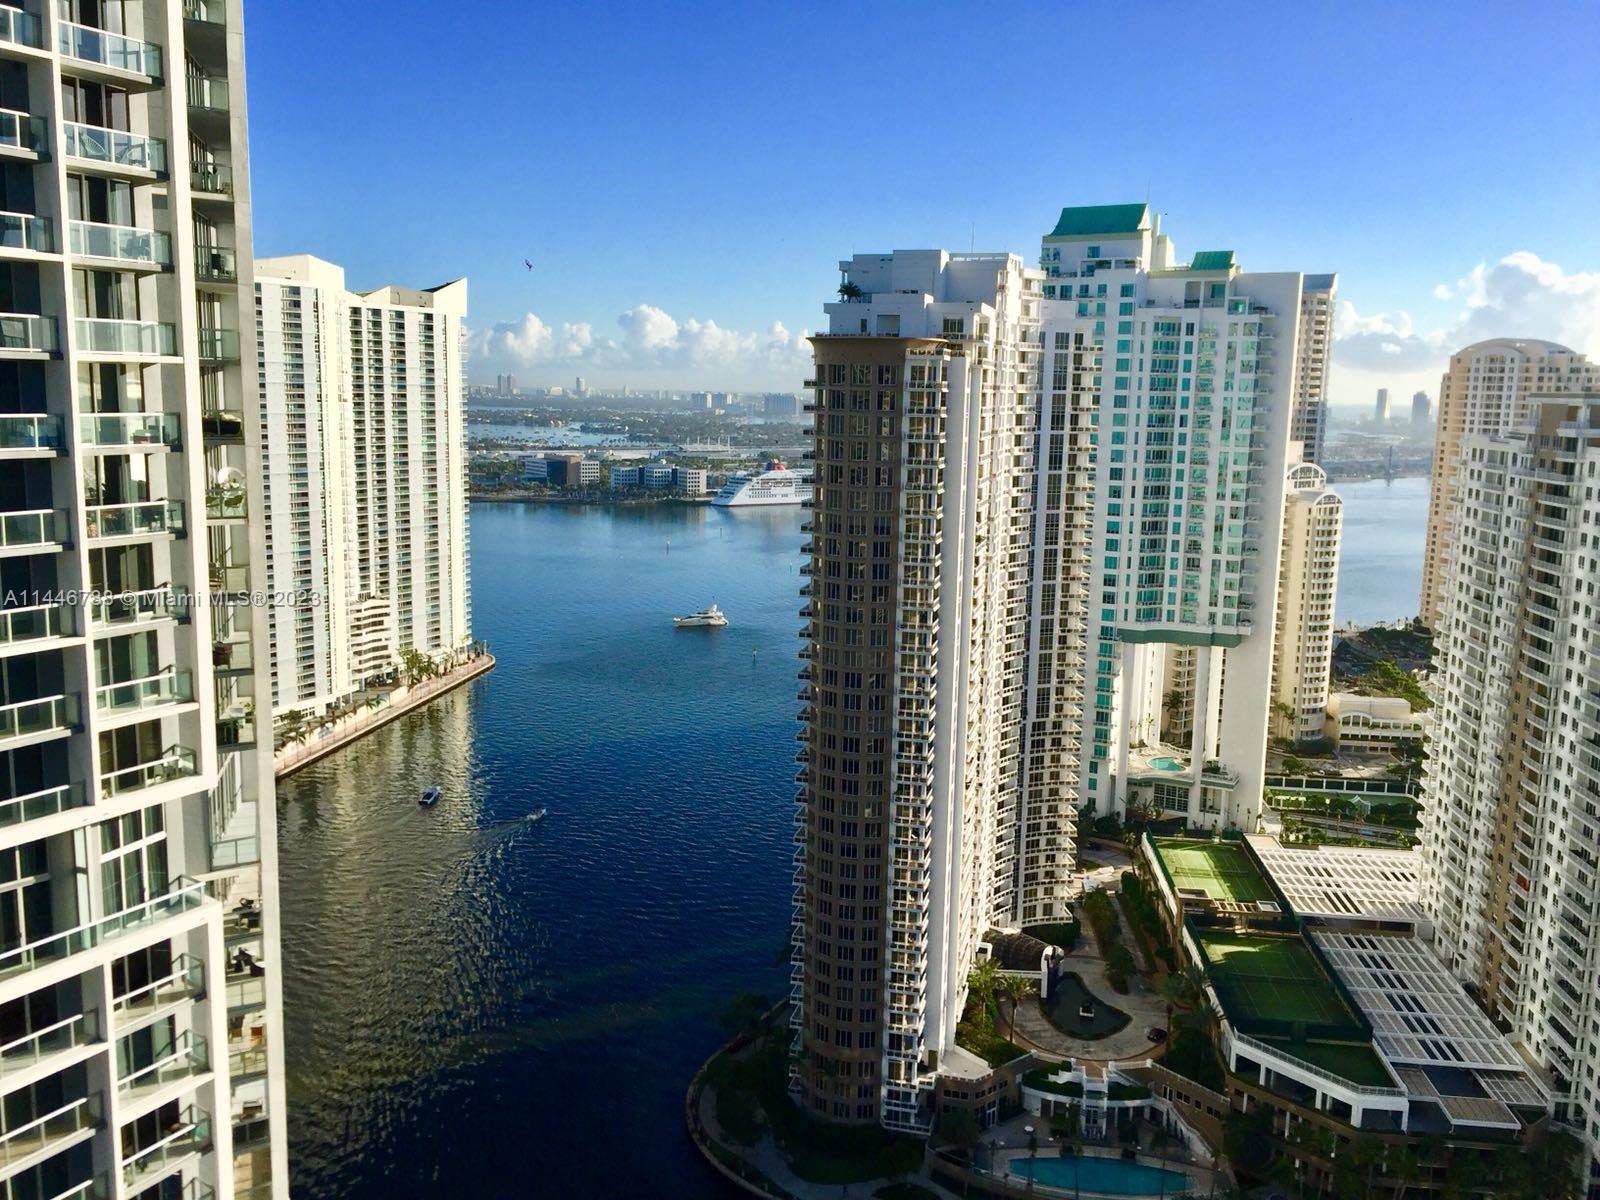 495 Brickell Ave 3410, Miami, Florida 33131, 2 Bedrooms Bedrooms, 4 Rooms Rooms,2 BathroomsBathrooms,Residential,For Sale,495 Brickell Ave 3410,A11446788